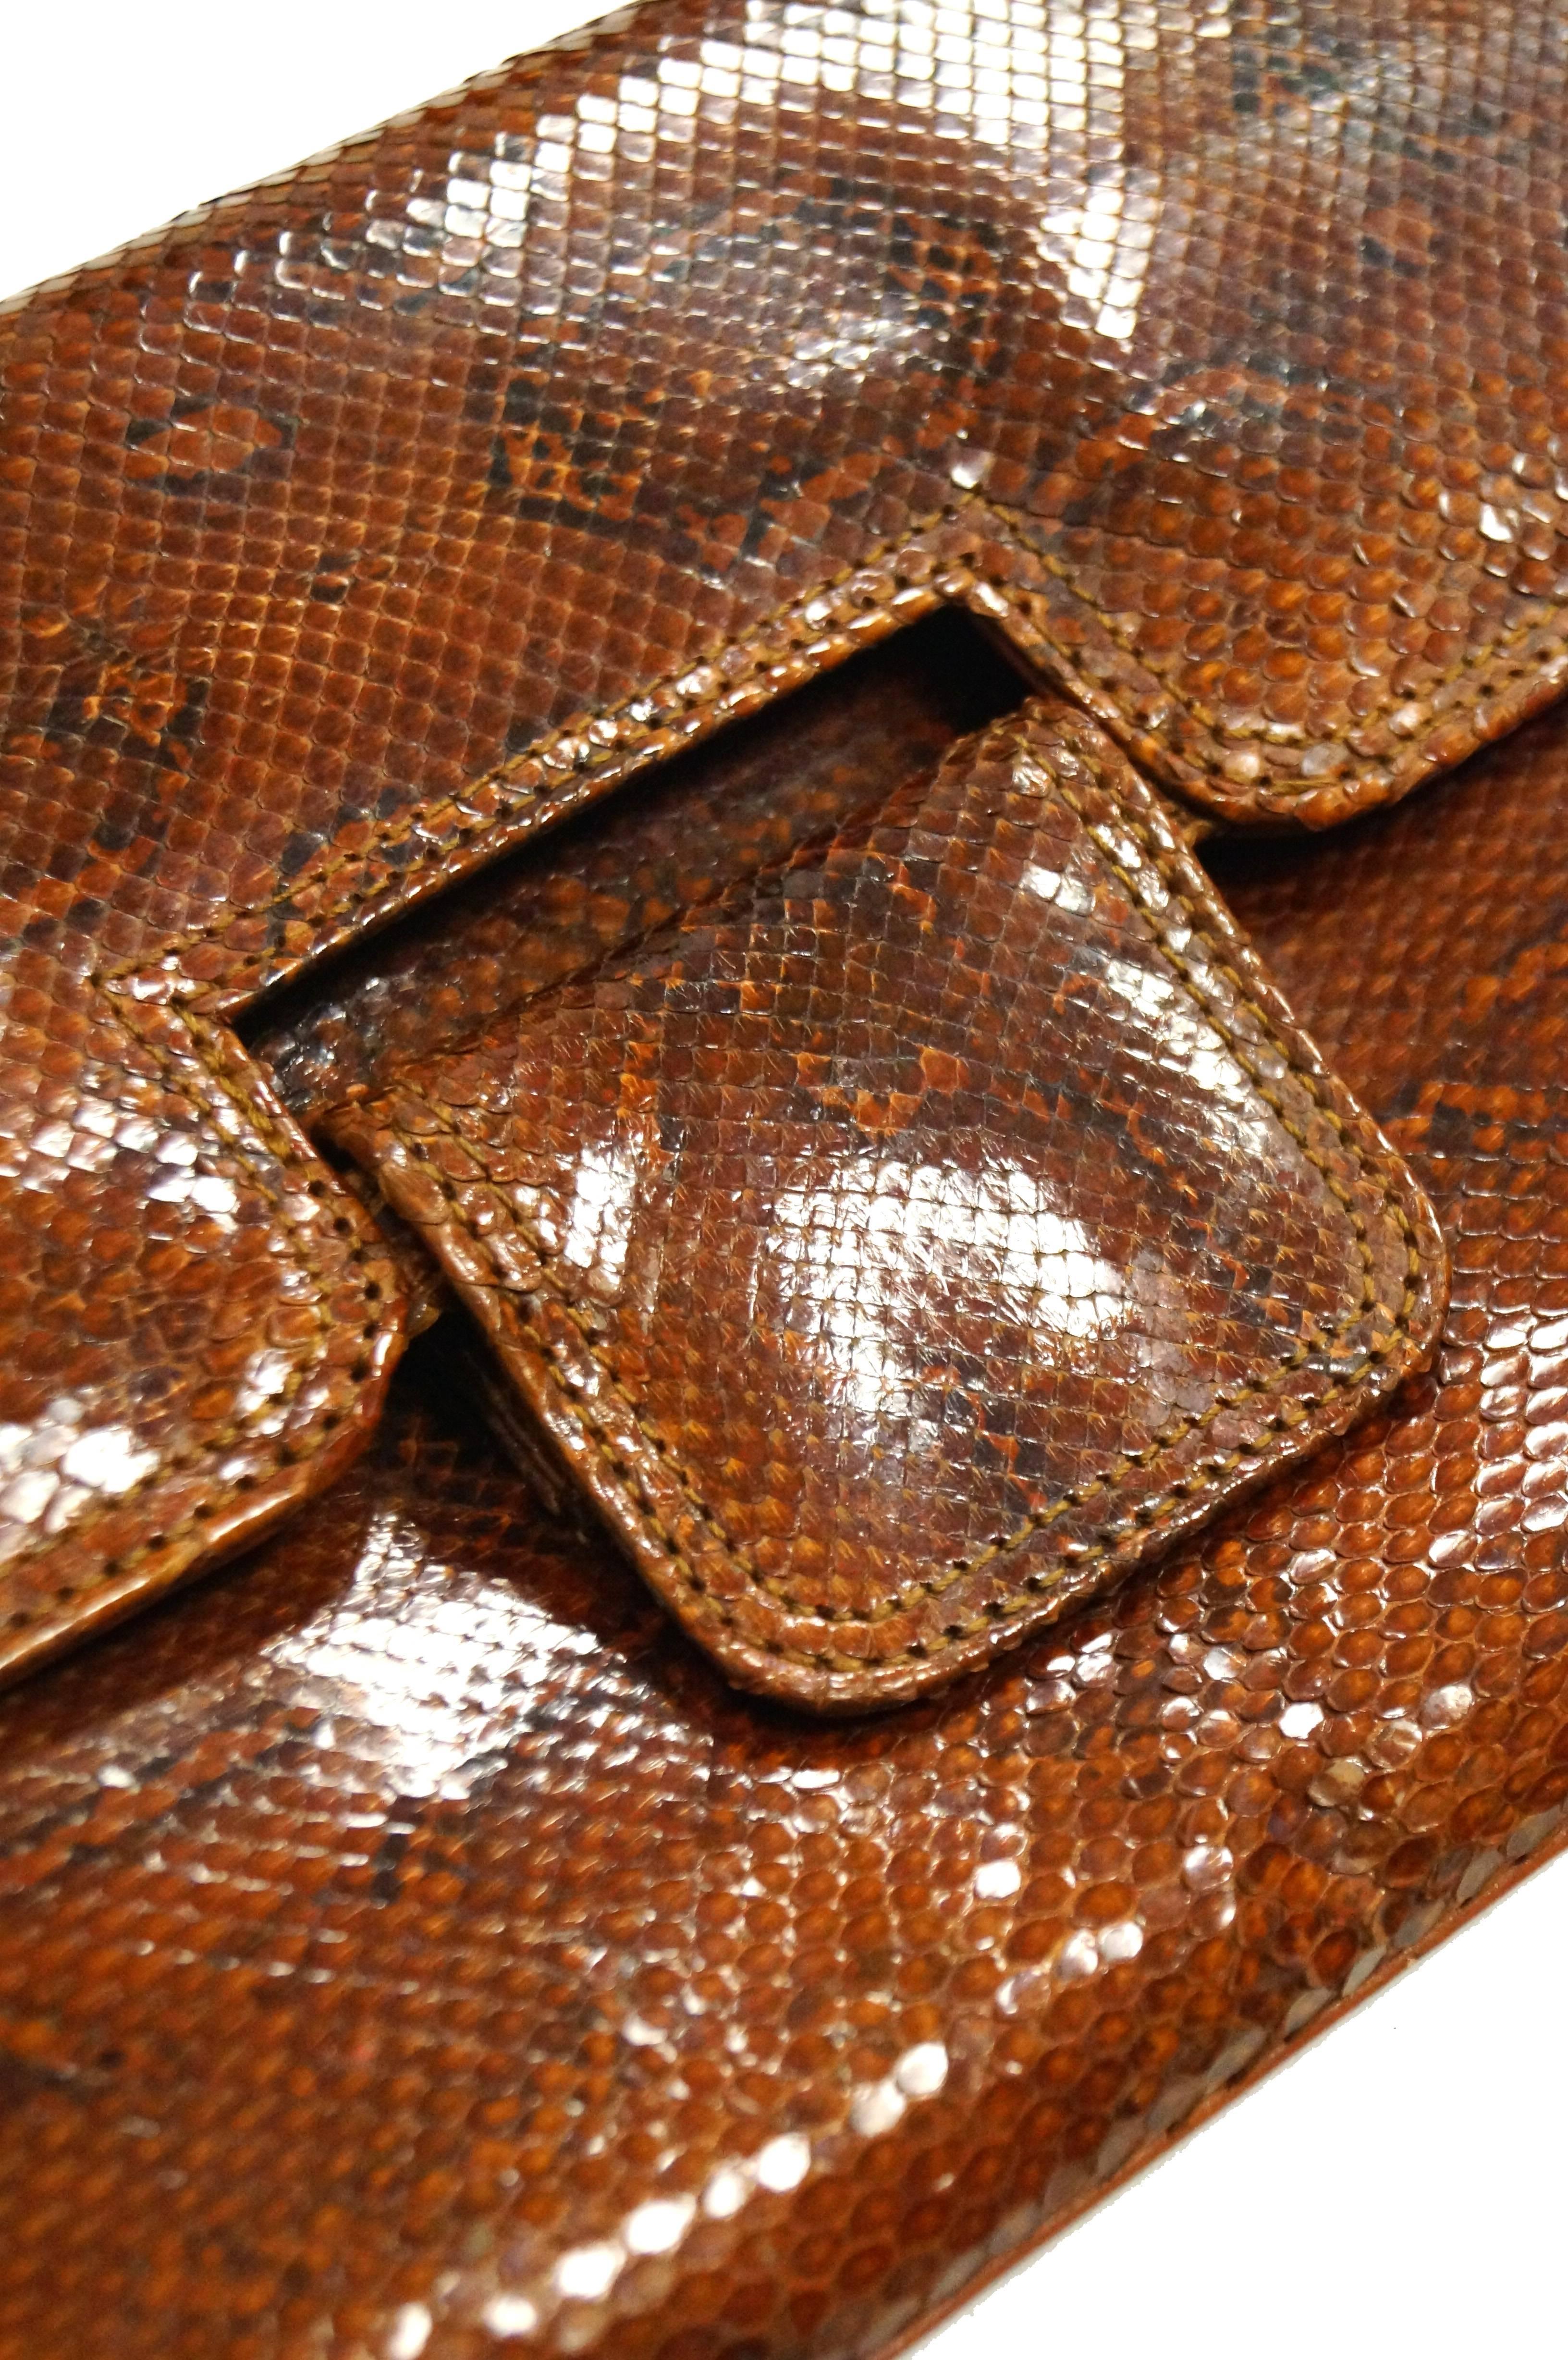 Gorgeous ochre - tone Argentine python snakeskin clutch by Rosenfeld! The clutch is rectangular, with clean lines and a glossy finish, as well as a fold-over closure. The interior is lined in tan leather, has a pocket, and features the Rosenfeld